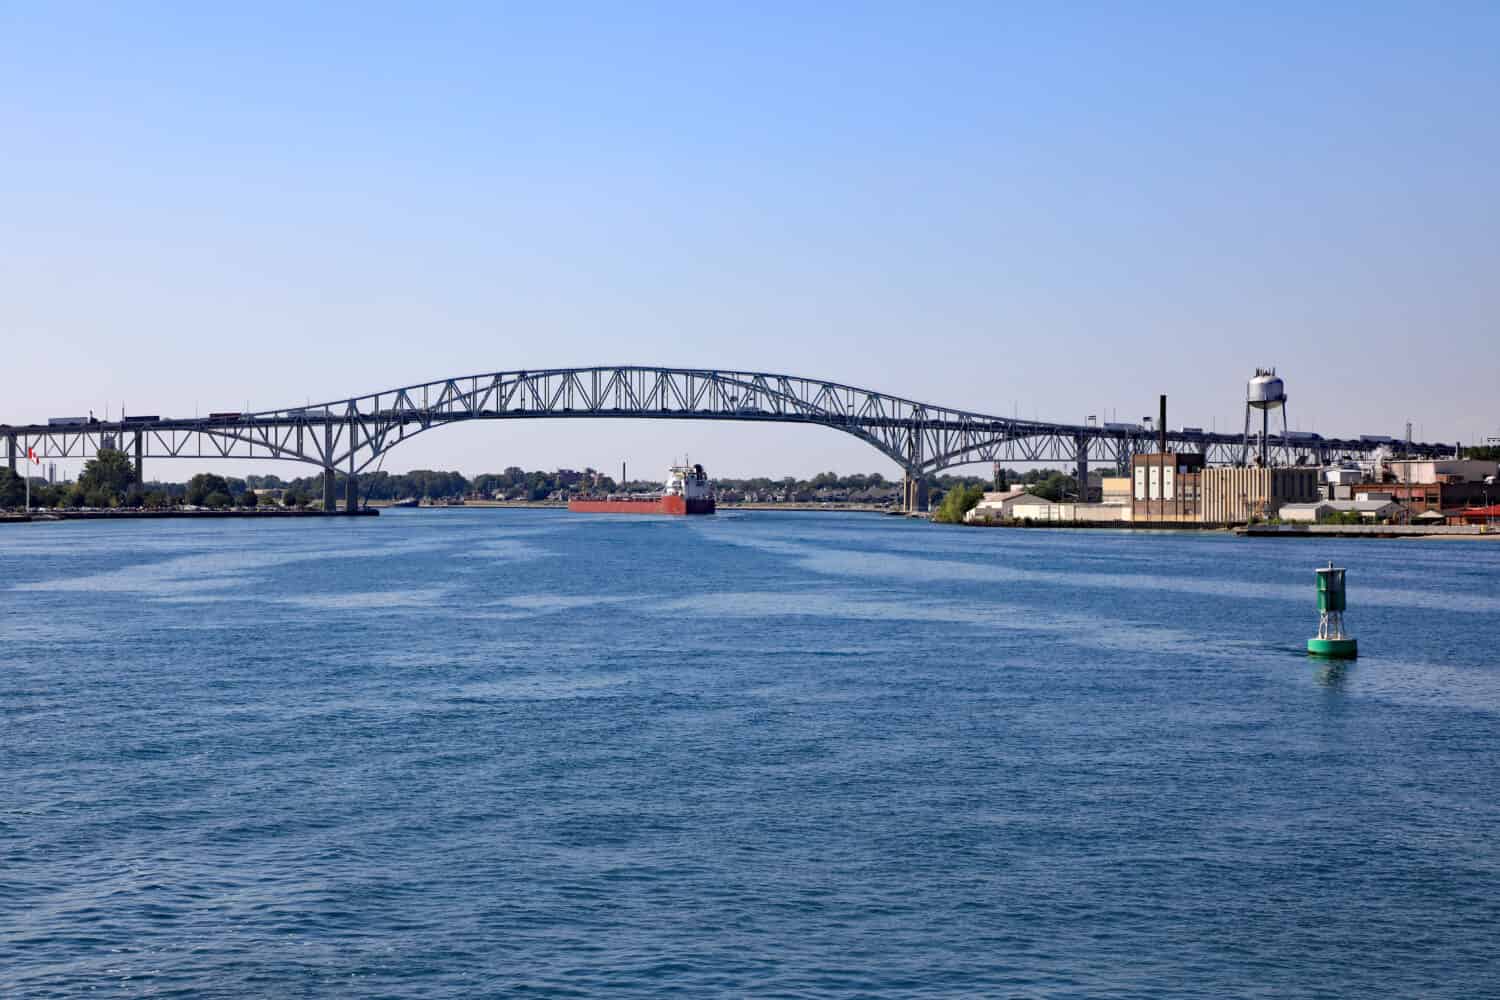 The Blue Water Bridge connecting Port Huron in Michigan, USA with Port Edward in Canada, a two span international bridge over the St. Clair River.